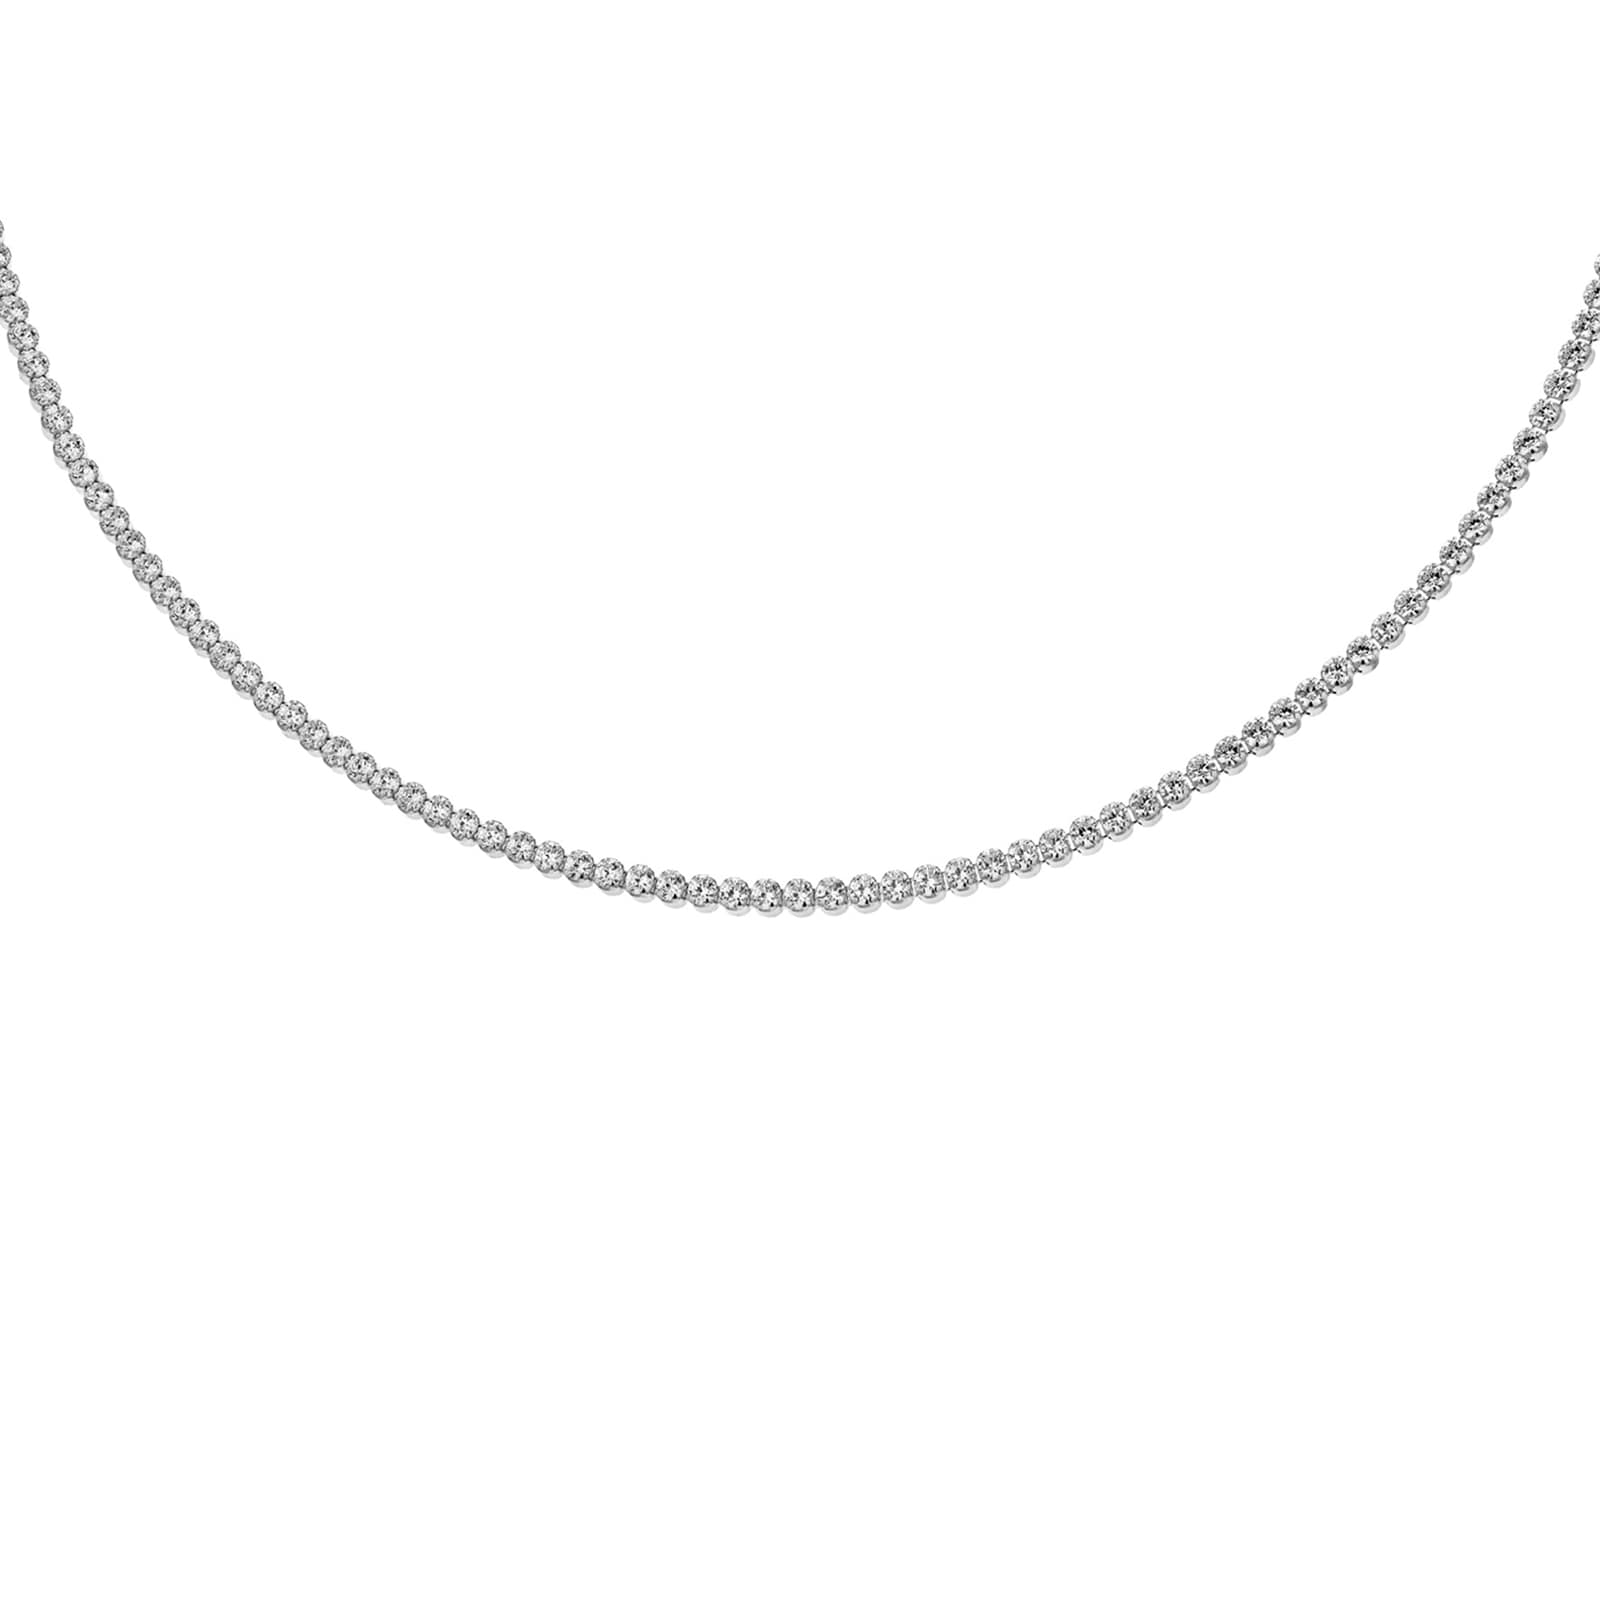 Stirling Silver Cubic Zirconia 18" Tennis Necklace